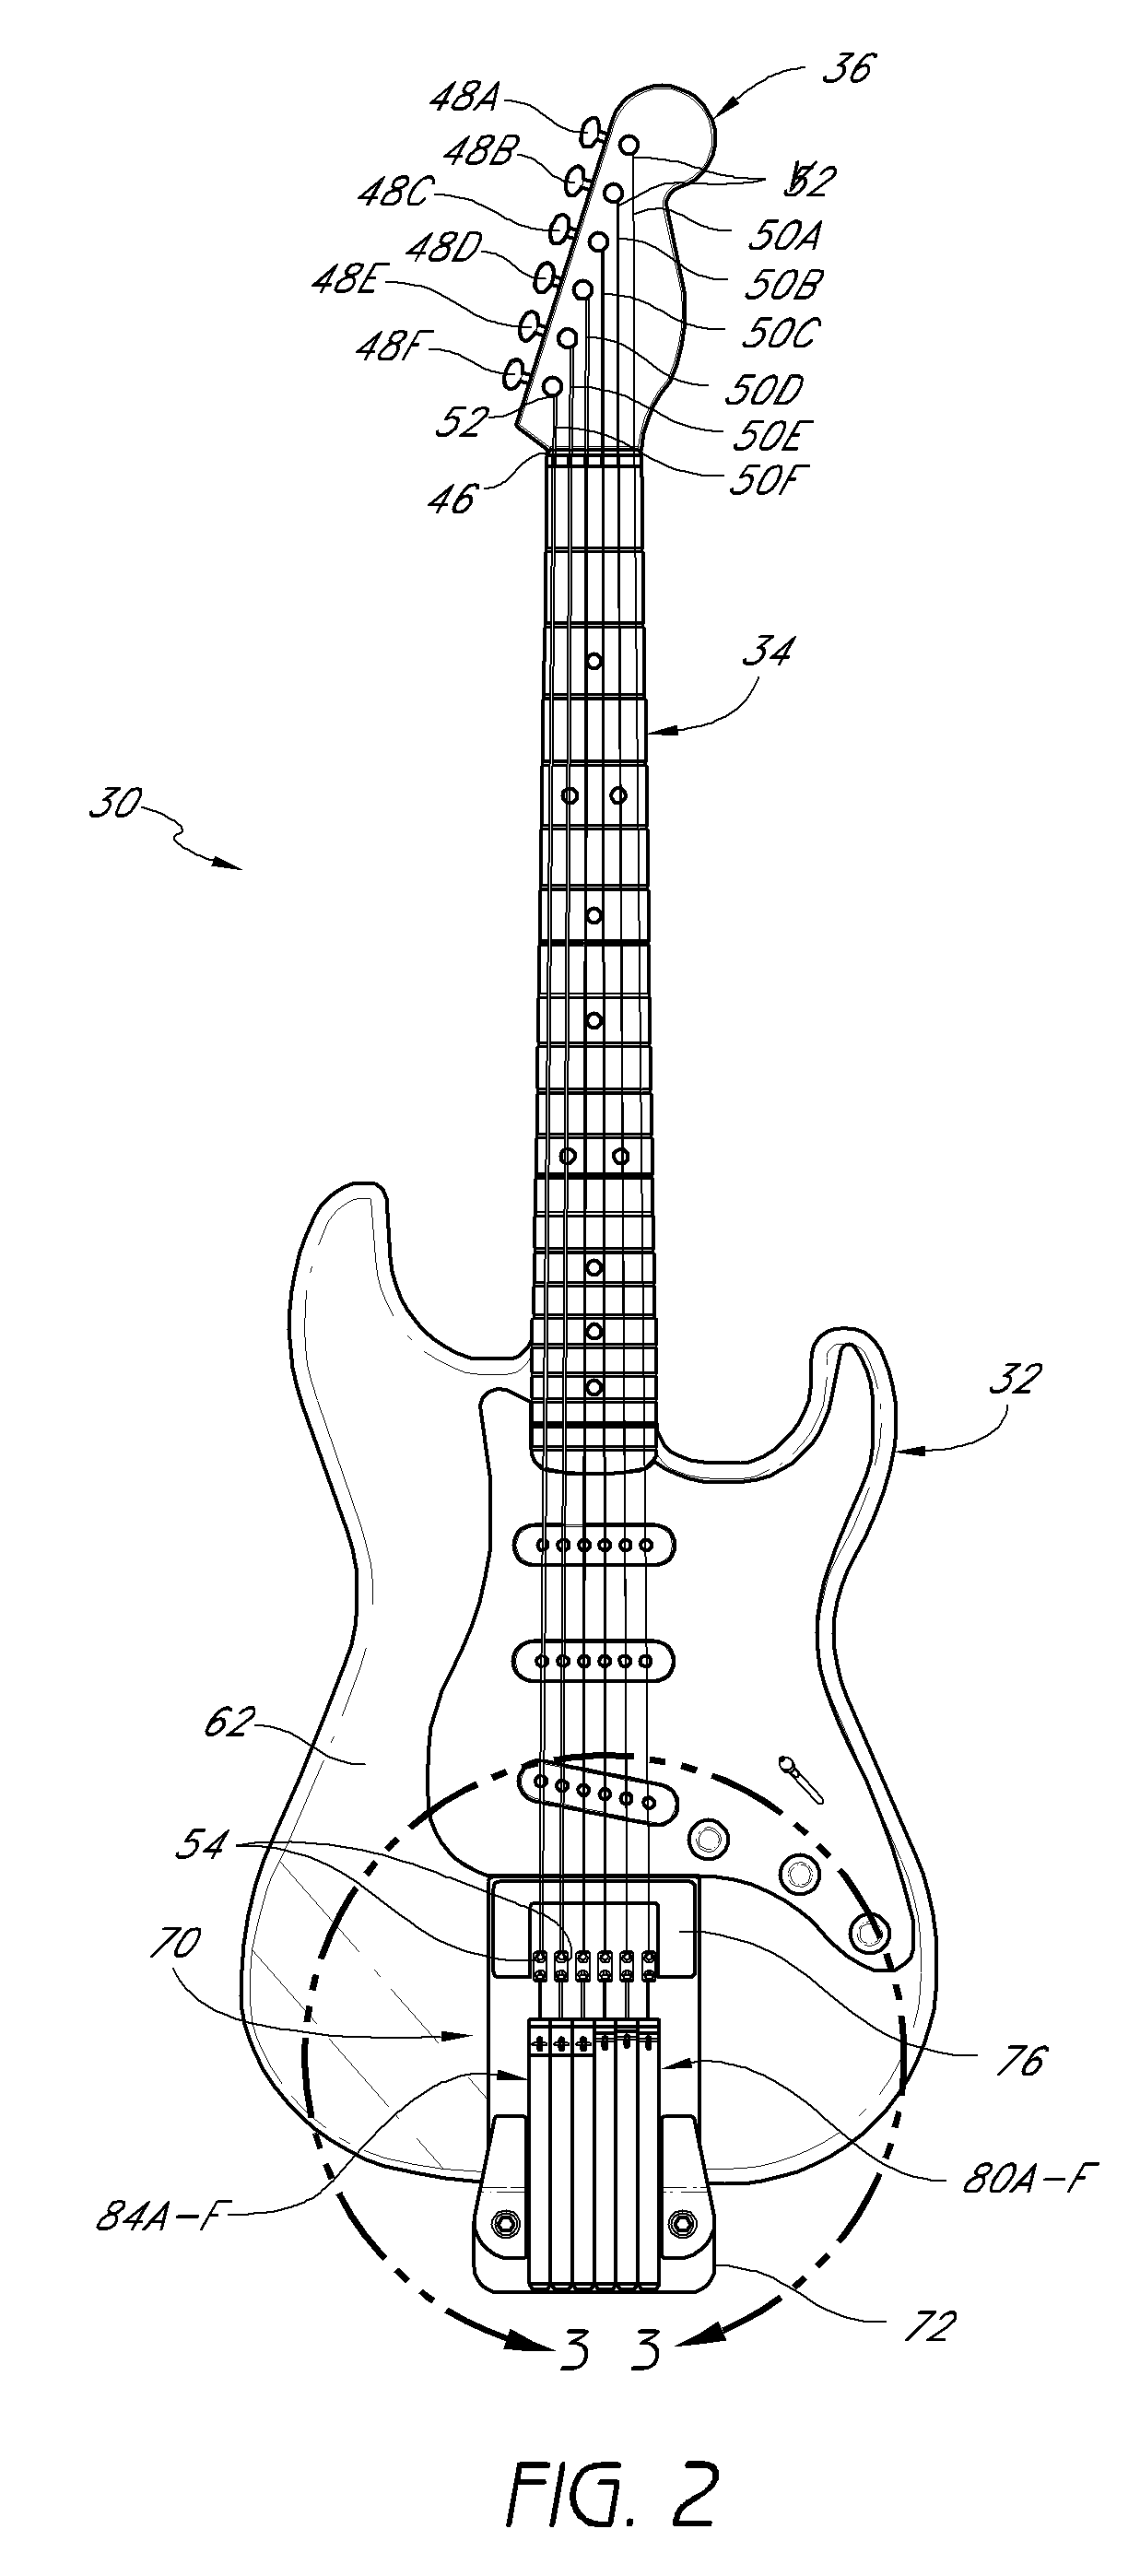 Stringed musical instrument using spring tension